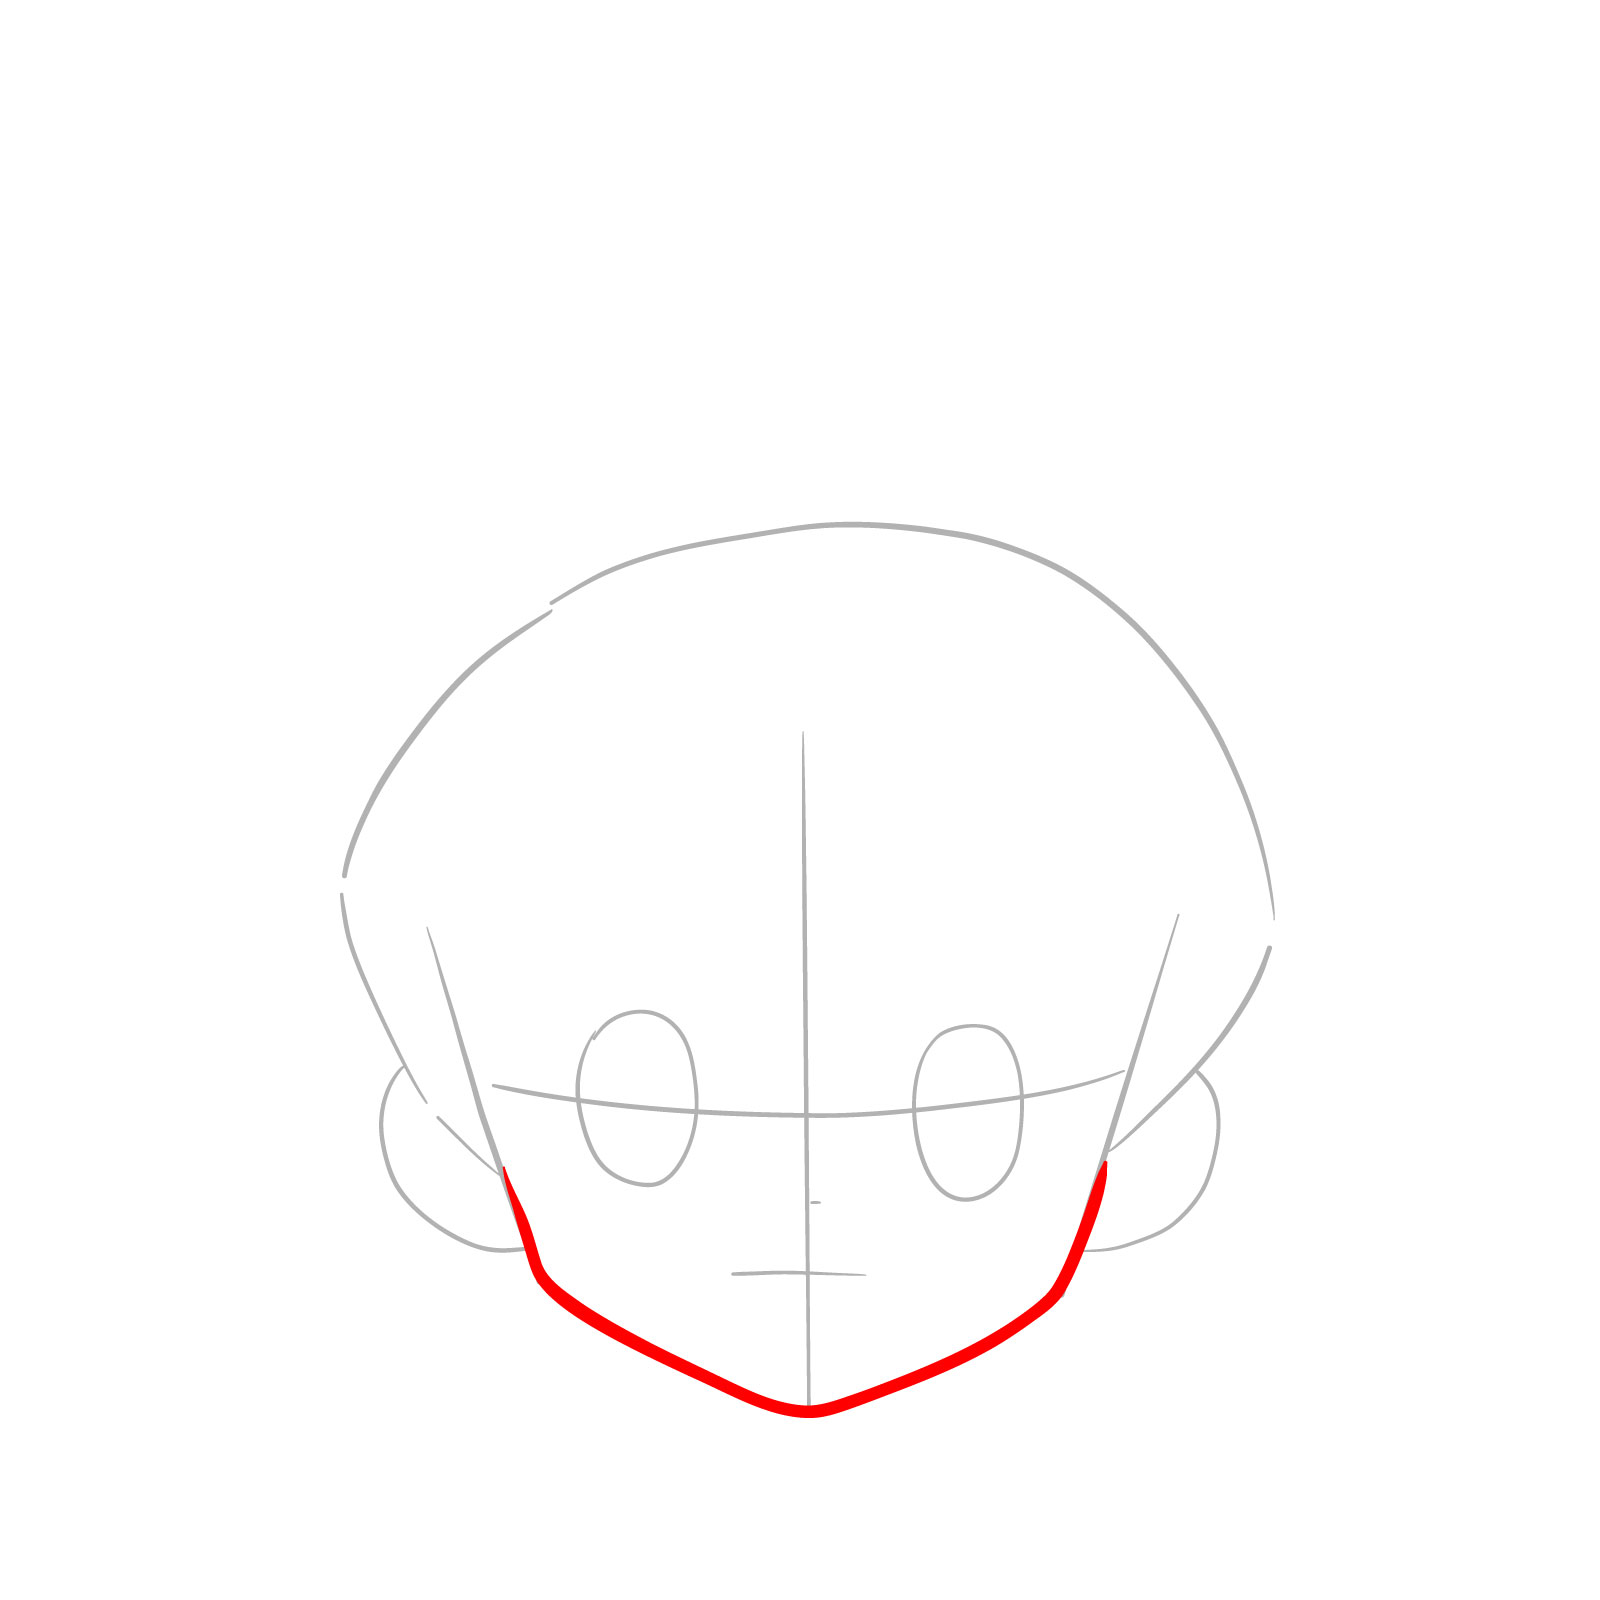 How to Draw Biscuit Krueger's face from Hunter x Hunter - step 04